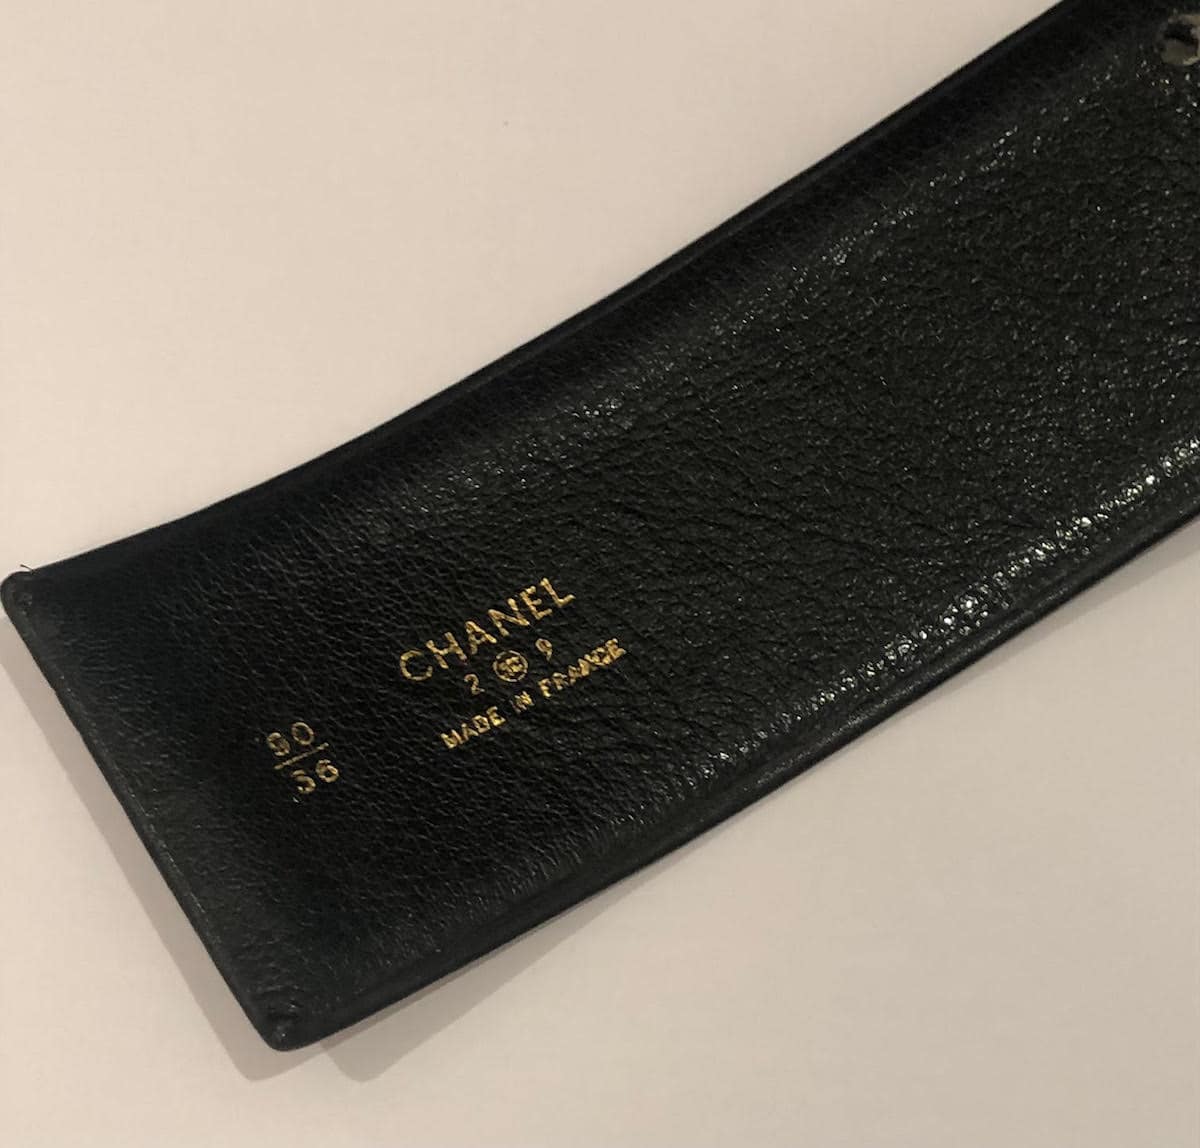 Sold at Auction: Chanel New 2019 Jumbo Clutch - Caviar Leather